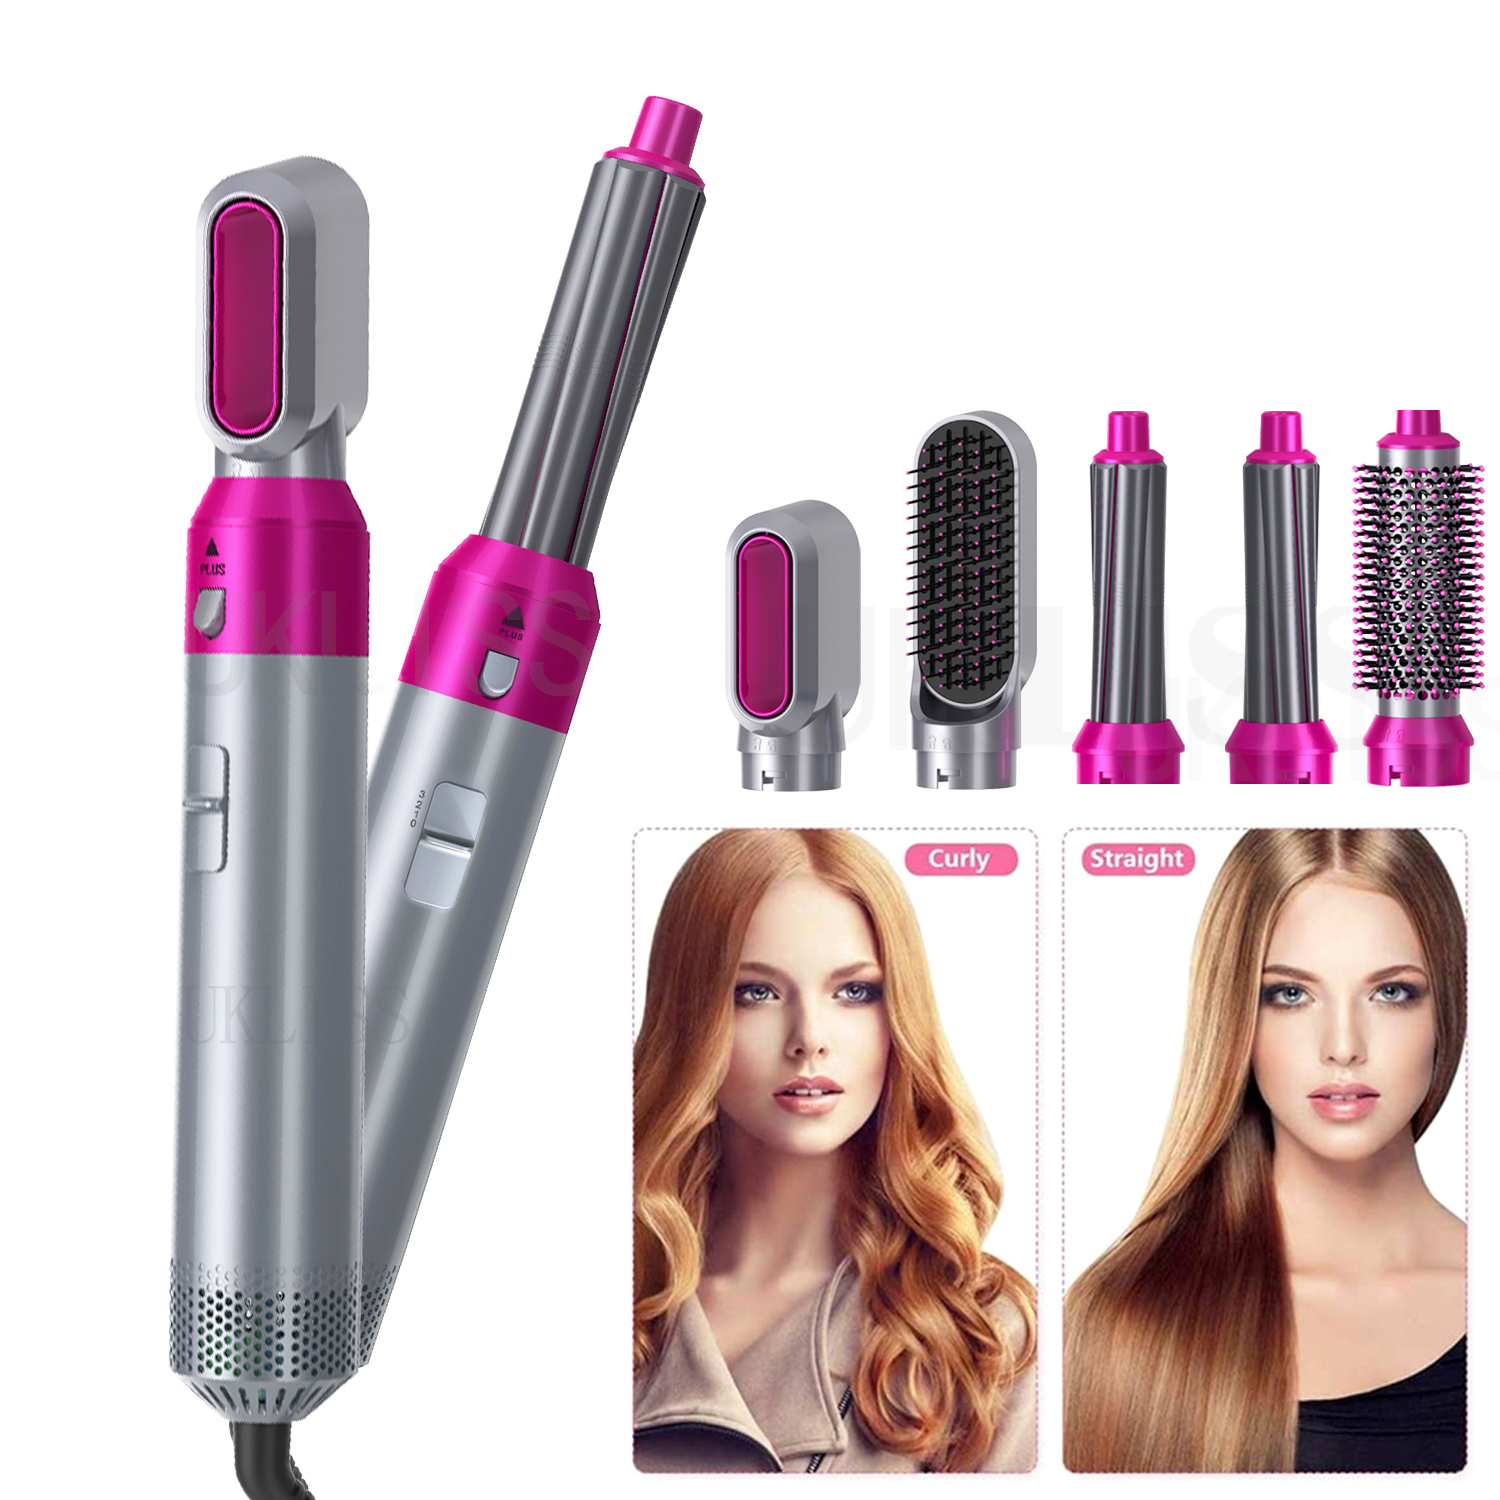 5 In 1 Electric Hair Dryer Brush - BabyLiss Pro